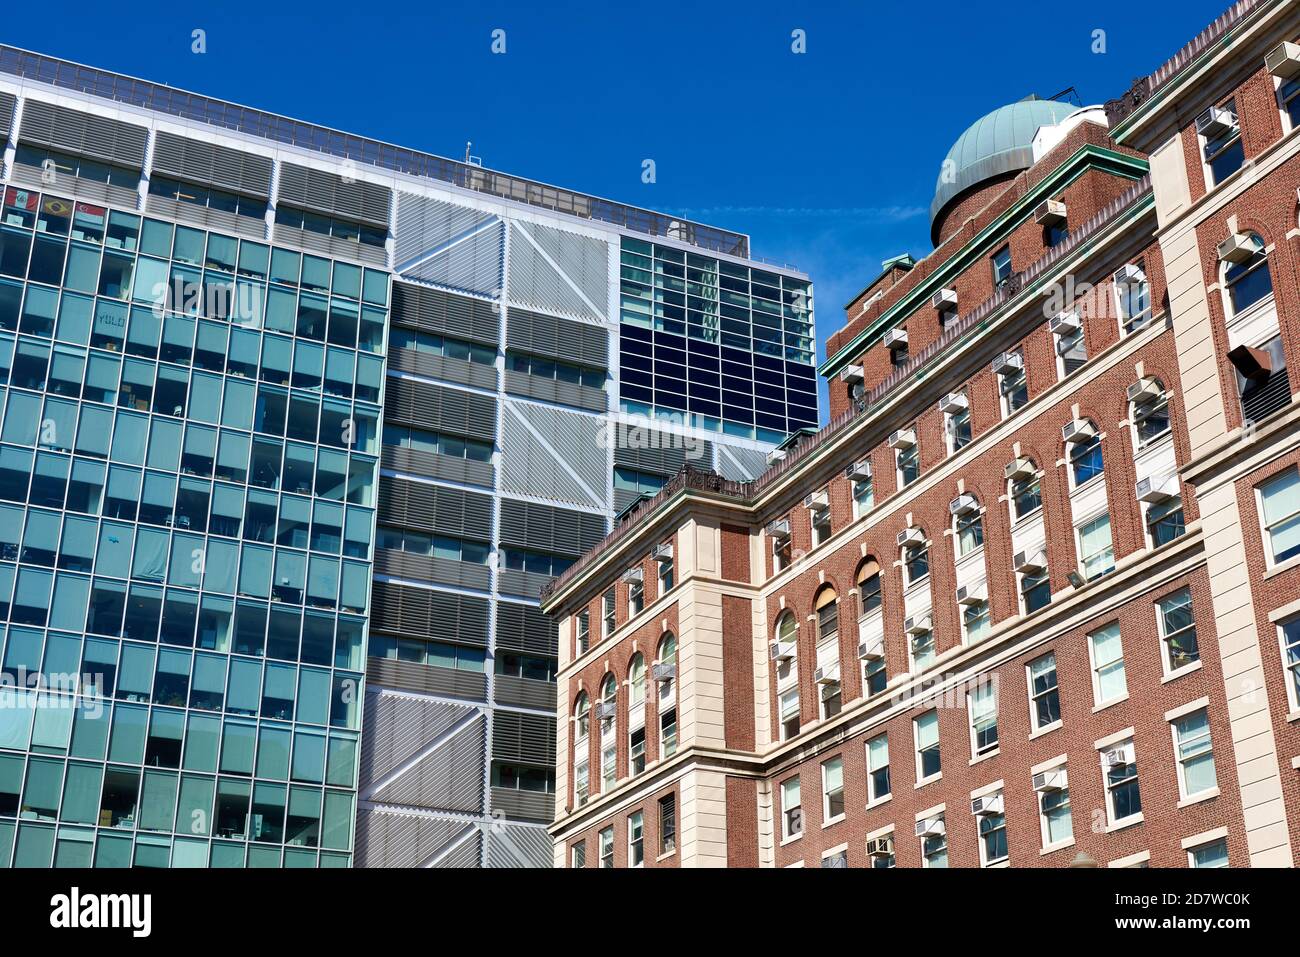 A 1927 brick and stone building is juxtaposed against a 2010 glass and steel structure on the Columbia University Morningside campus. Stock Photo